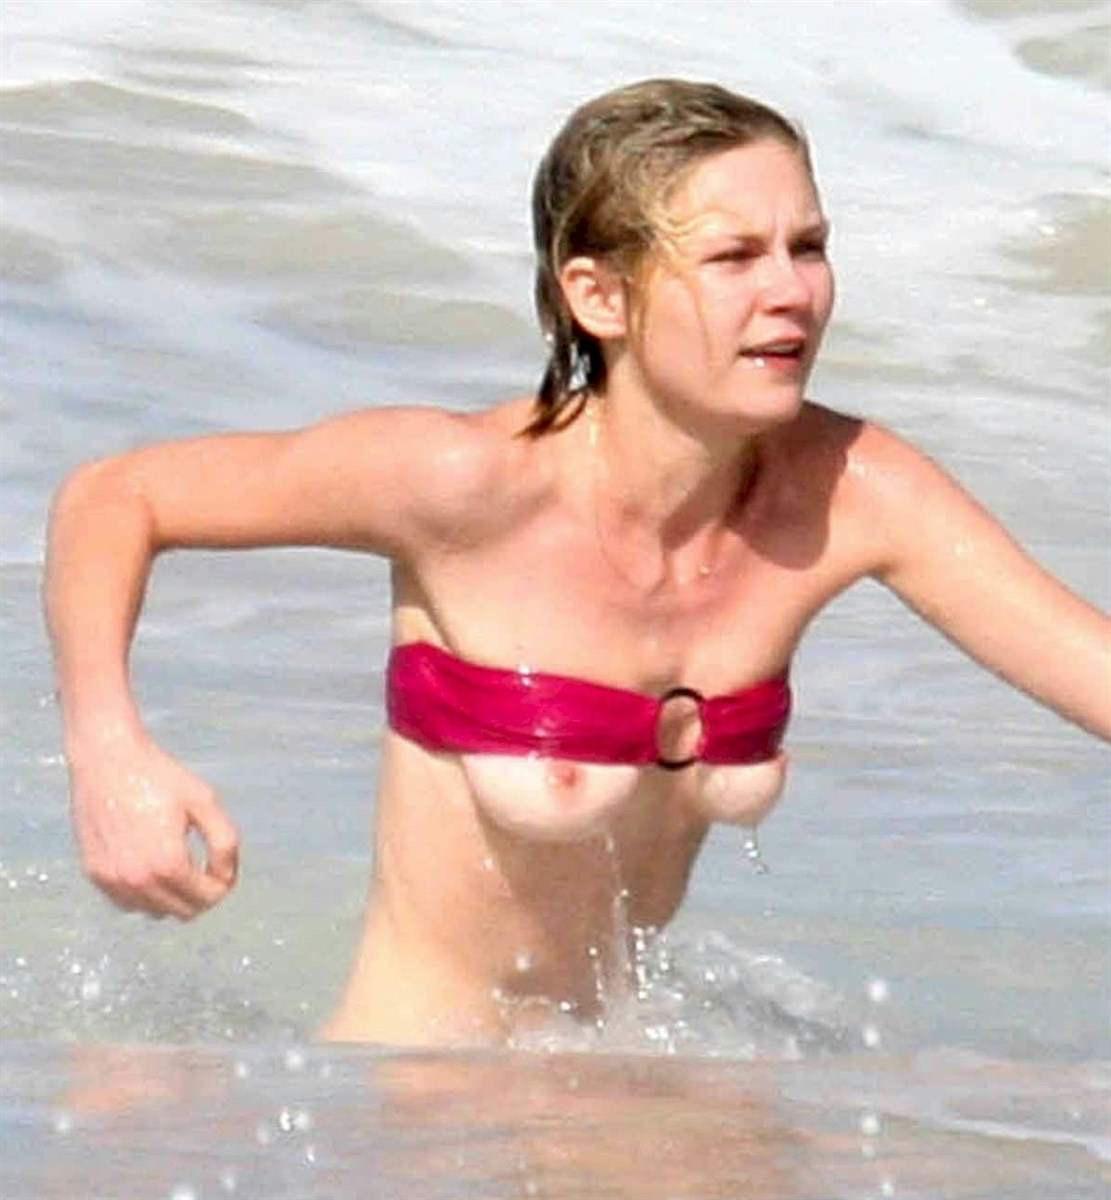 Kirsten Dunsts Tits Fall Out NSFW NSFW